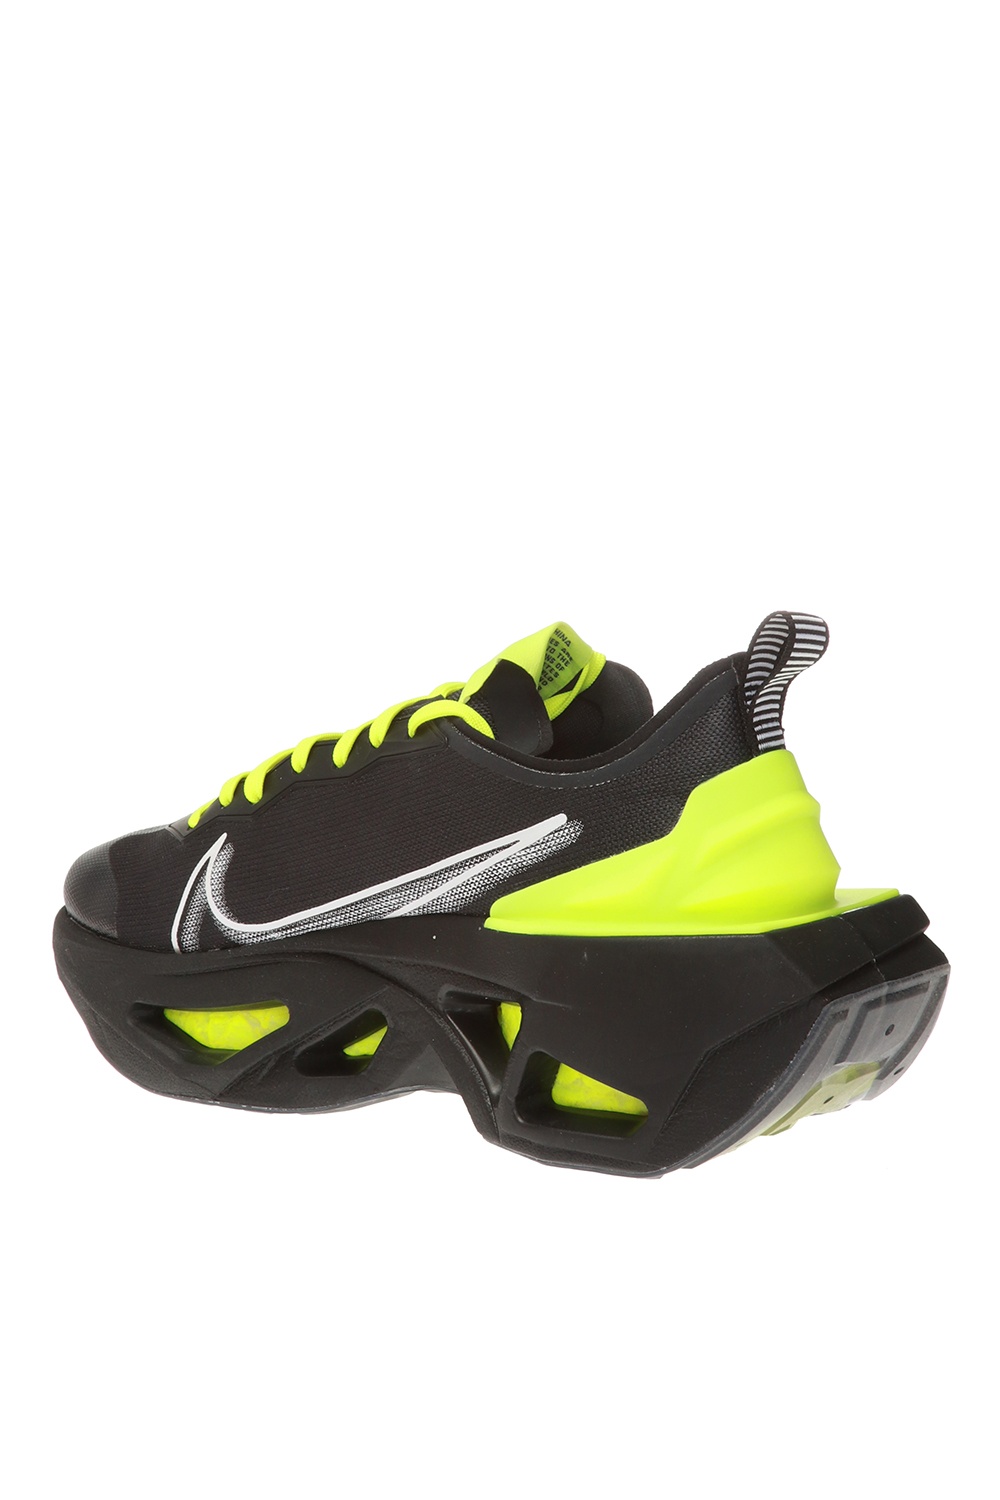 nike zoomx vista grind black and yellow 